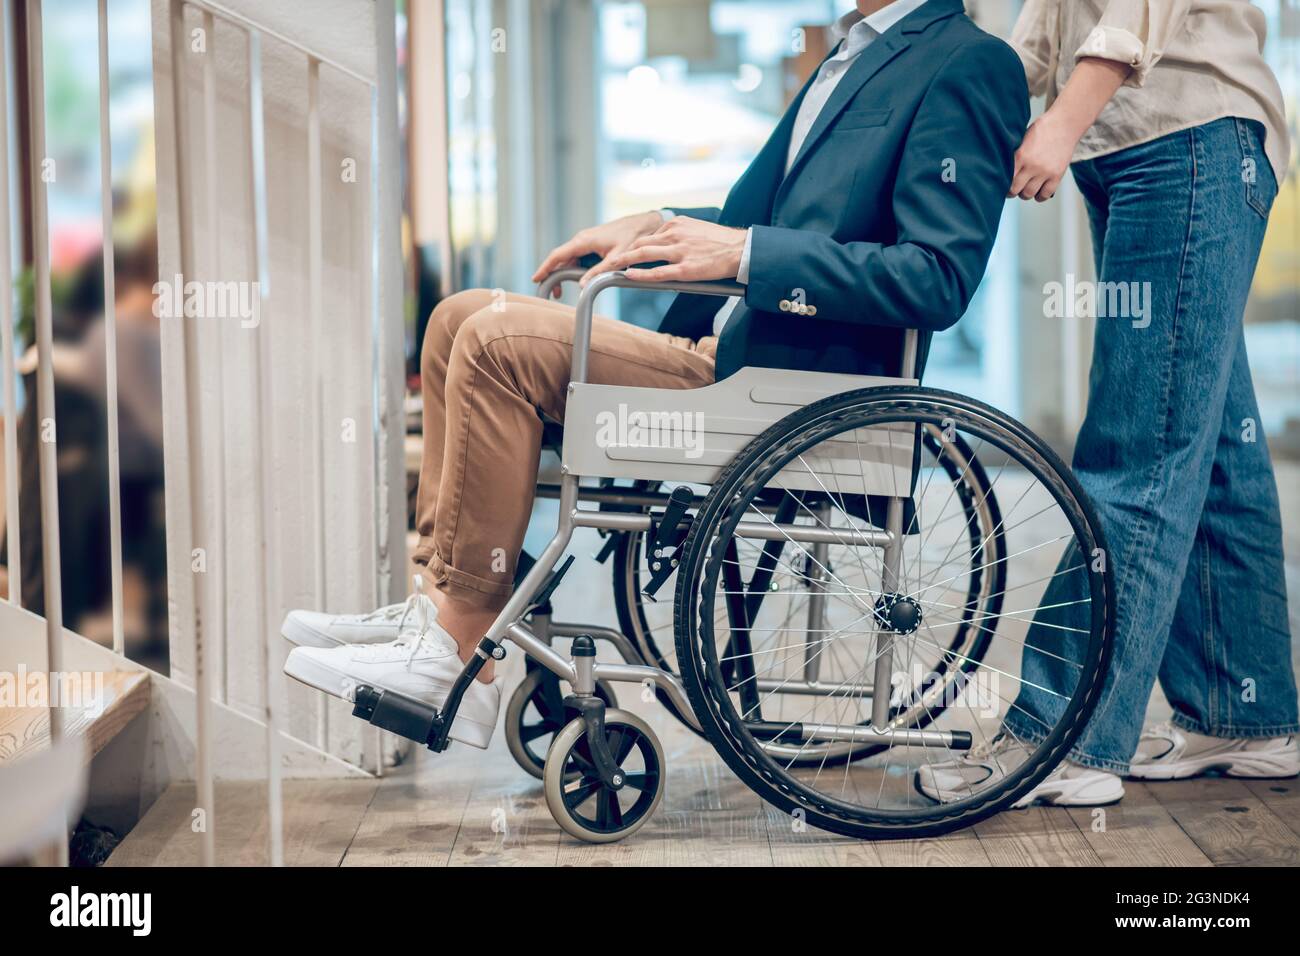 Man in wheelchair and accompanying assistant Stock Photo